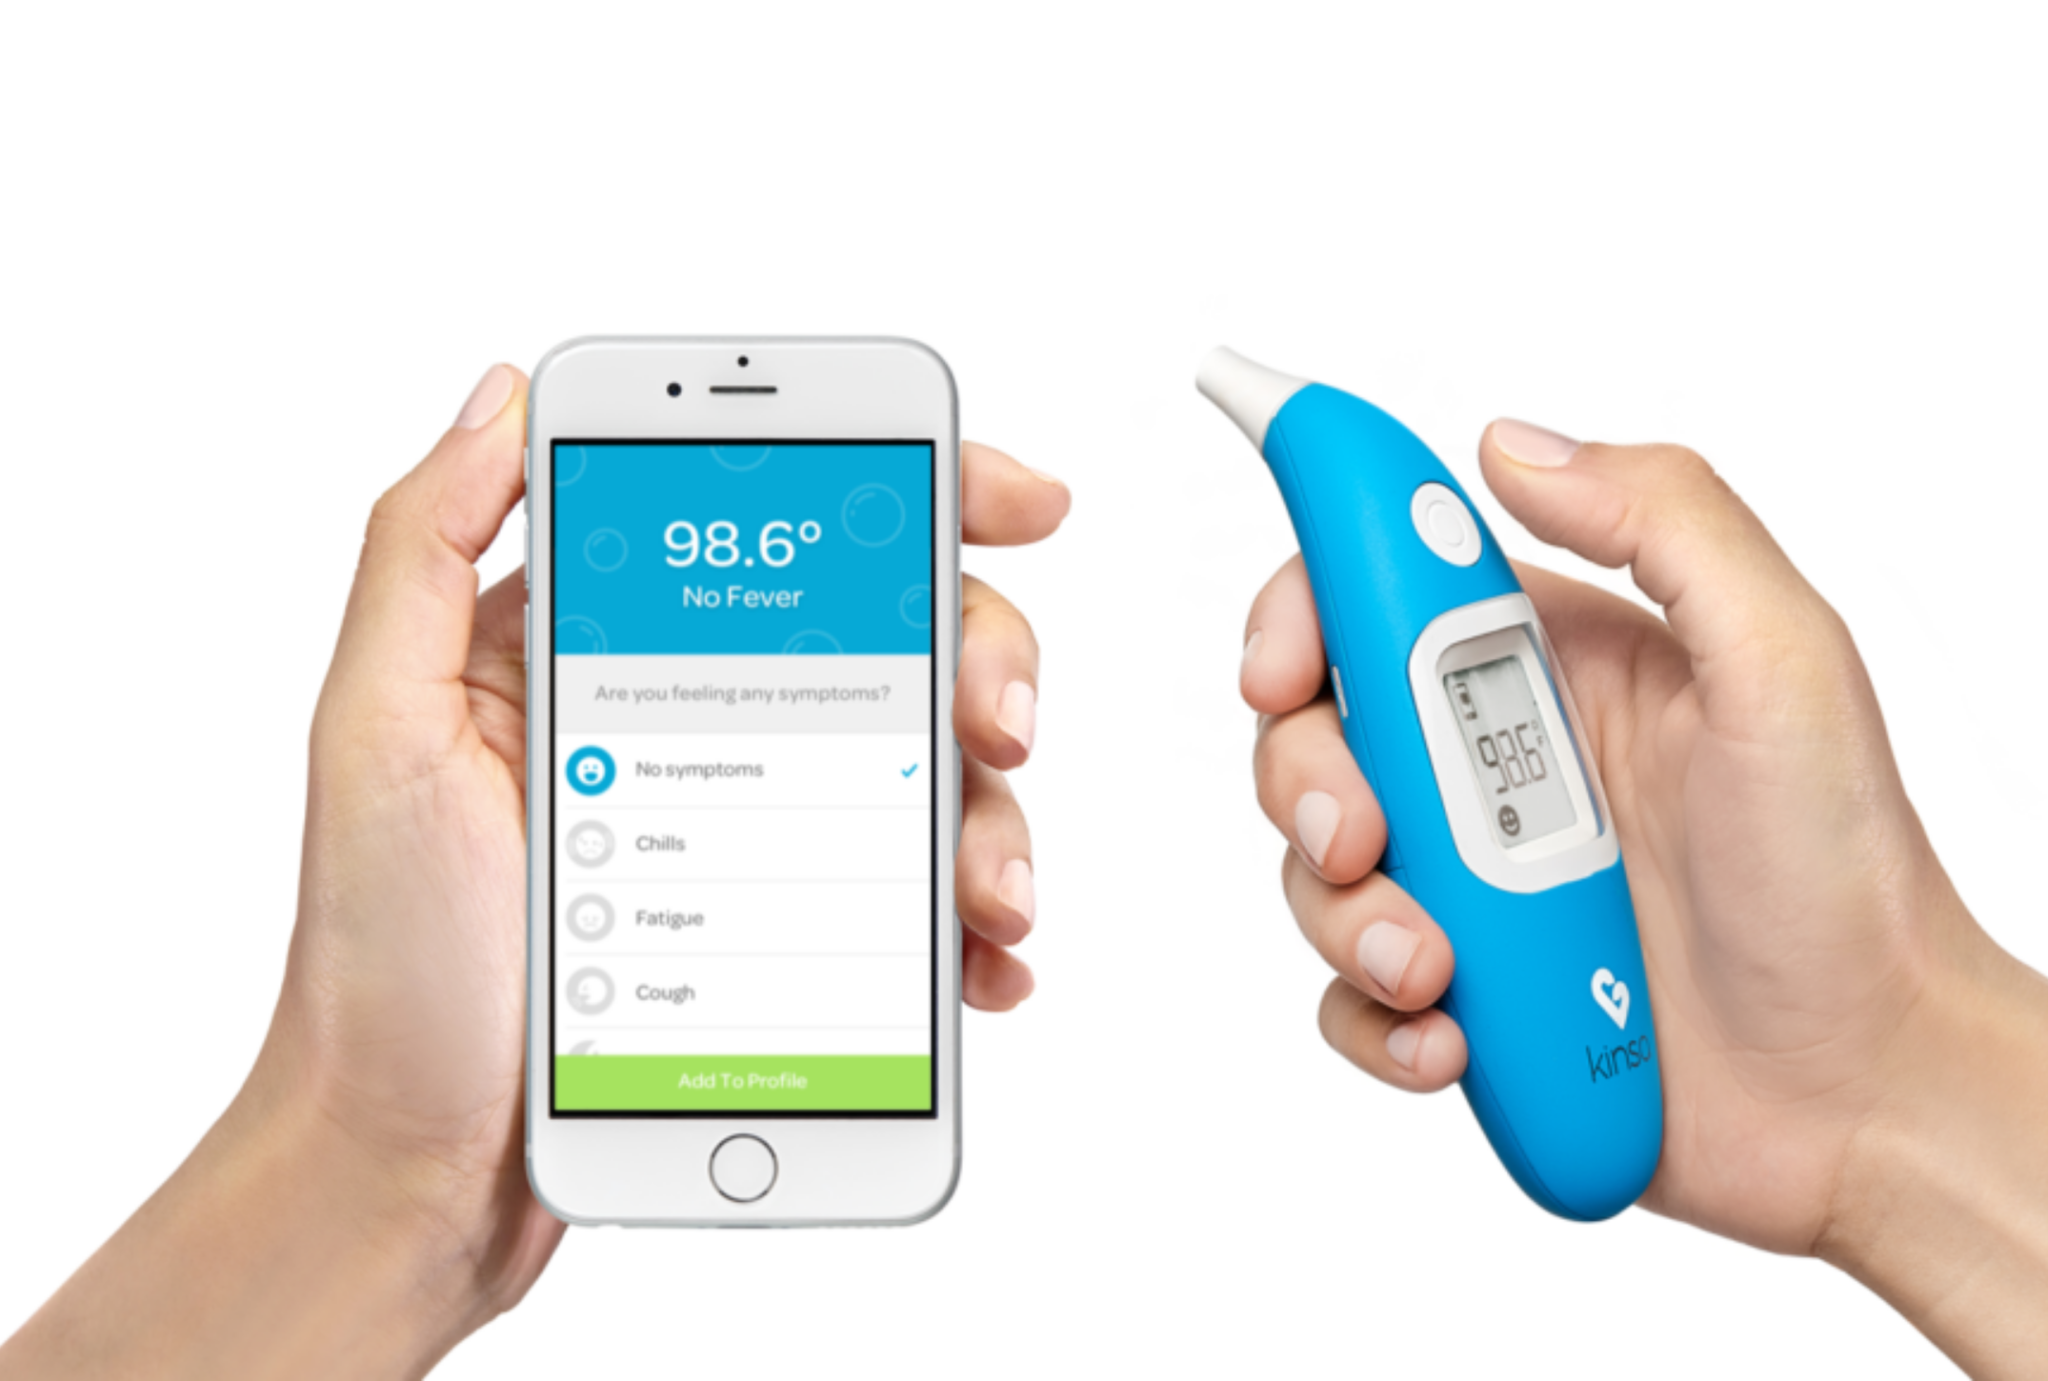 New York-based start-up Kinsa Inc. has launched Kinsa Smart Ear Thermometer, an in-ear device, designed primarily for pediatric use, which automatically syncs with Kinsa’s app to upload readings and track them over smartphone.